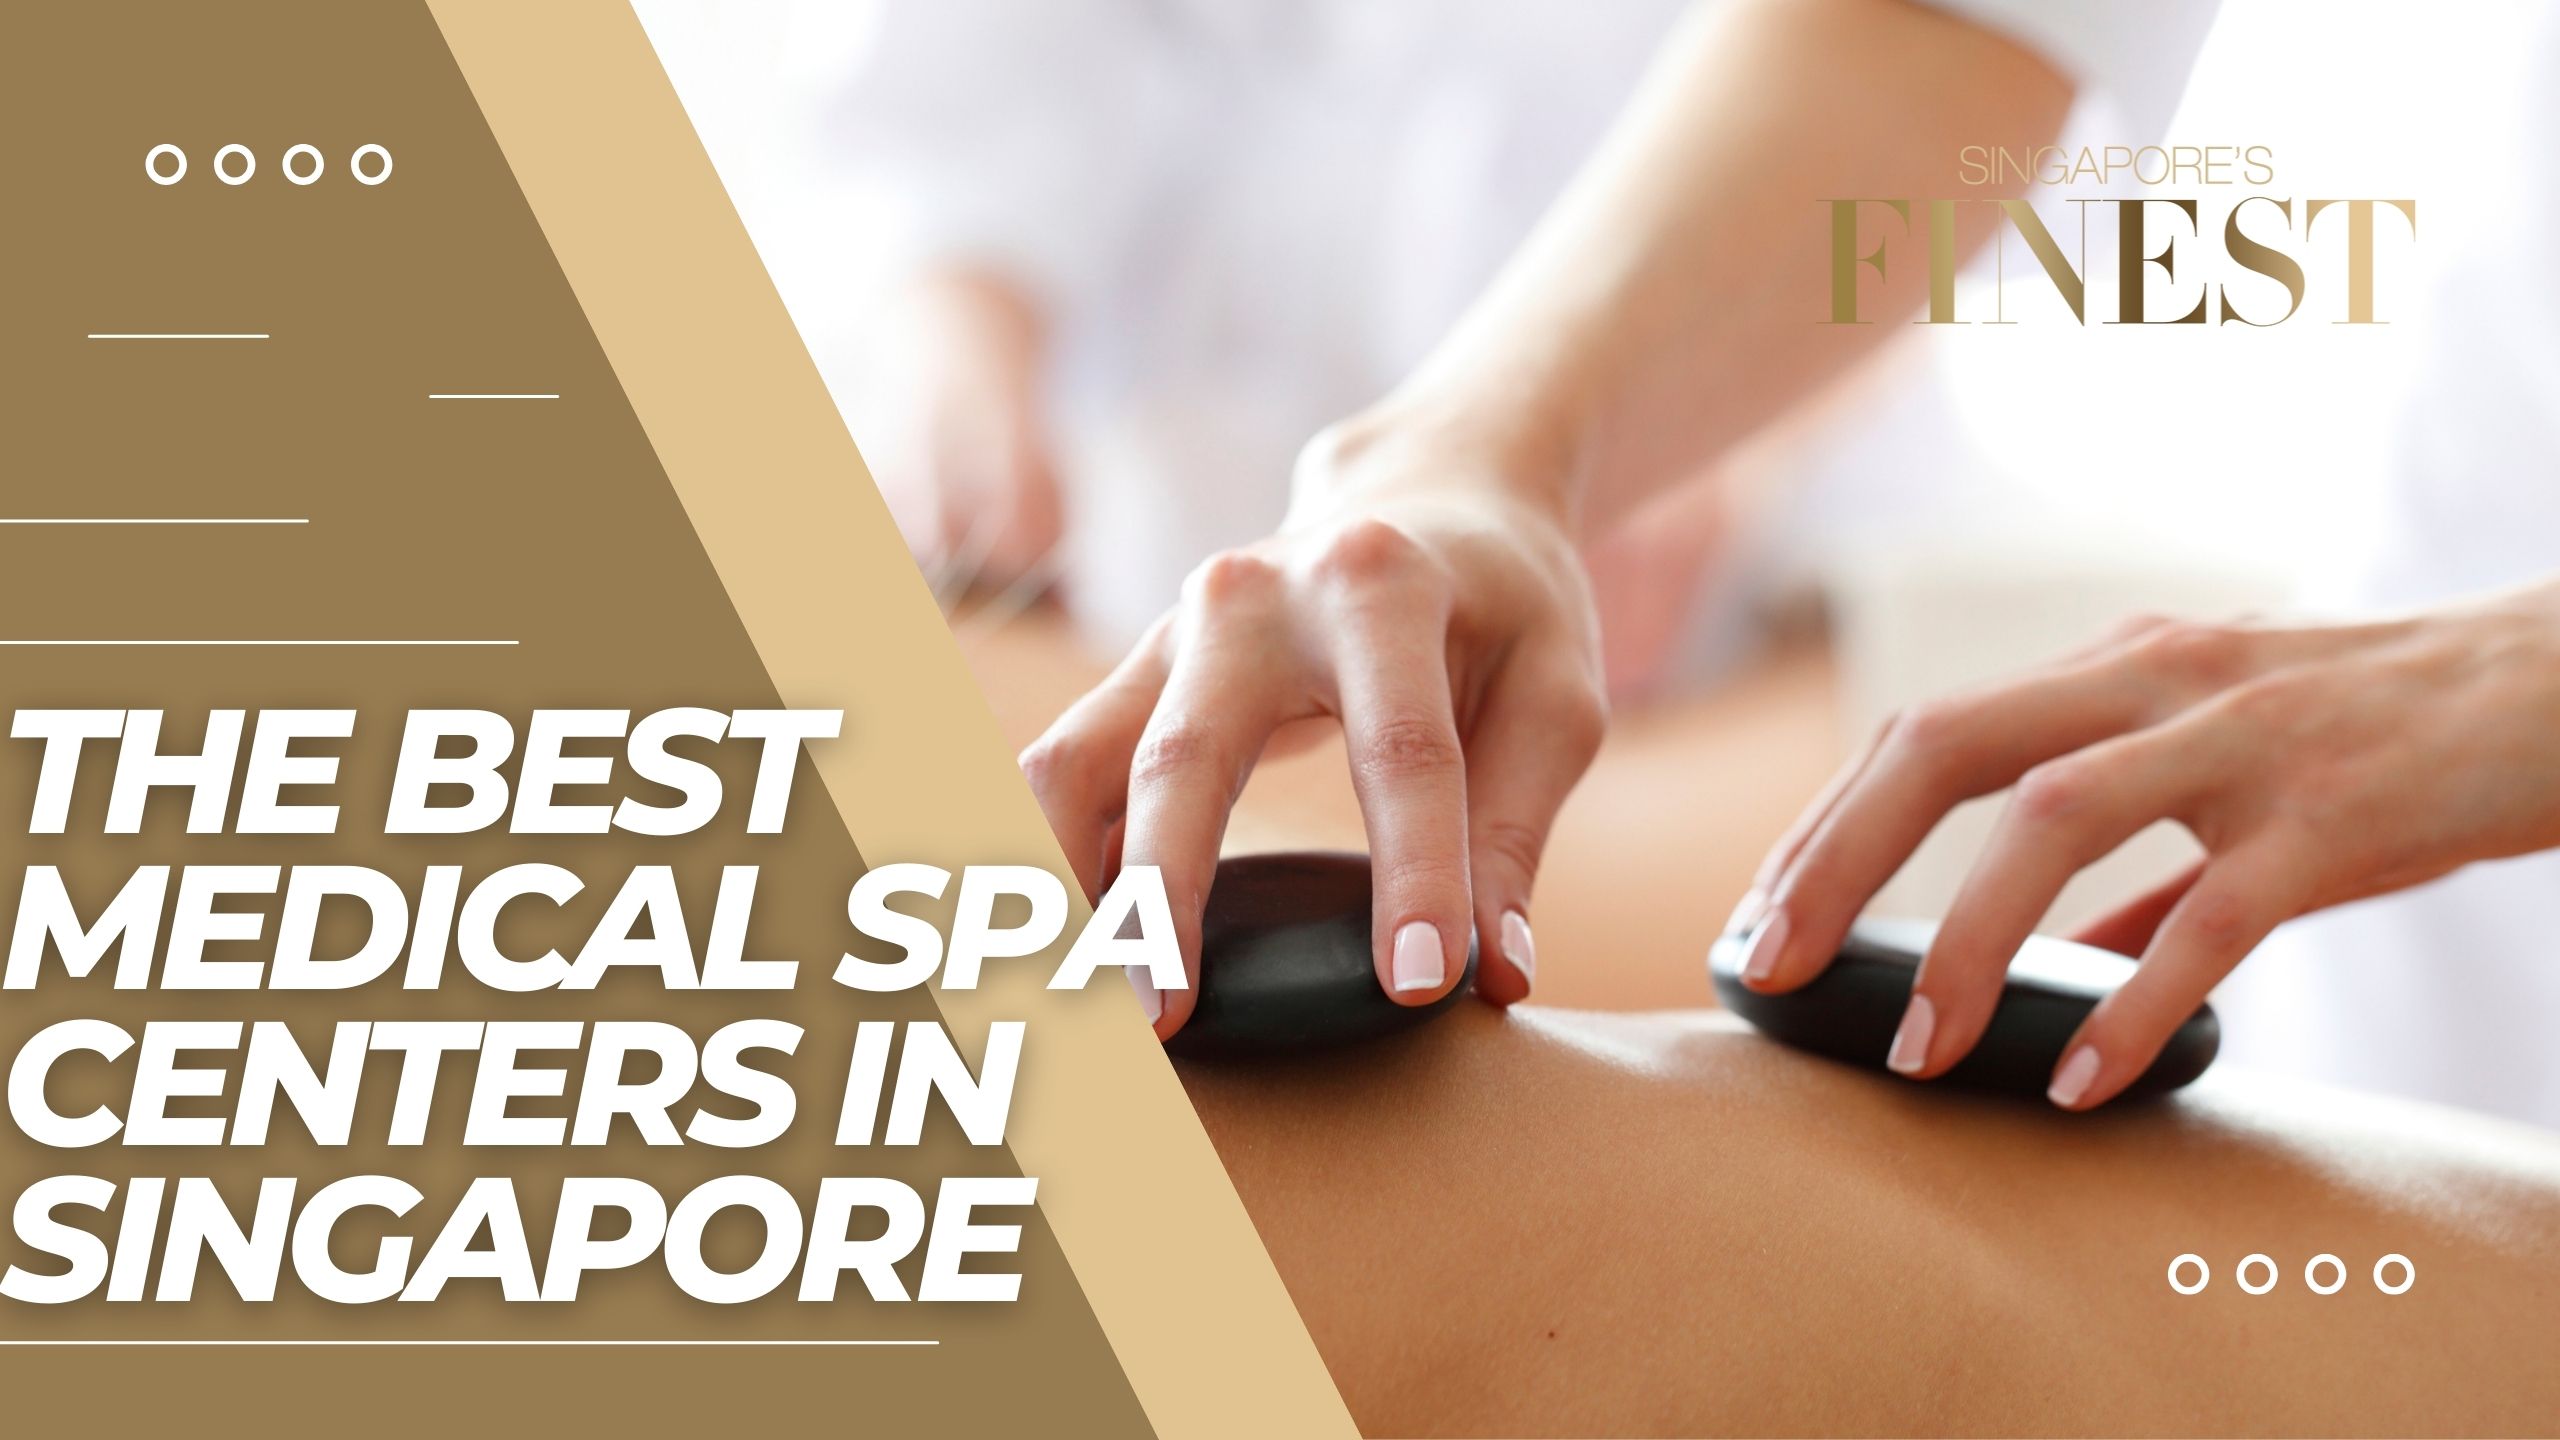 The Finest Medical Spa Centers in Singapore